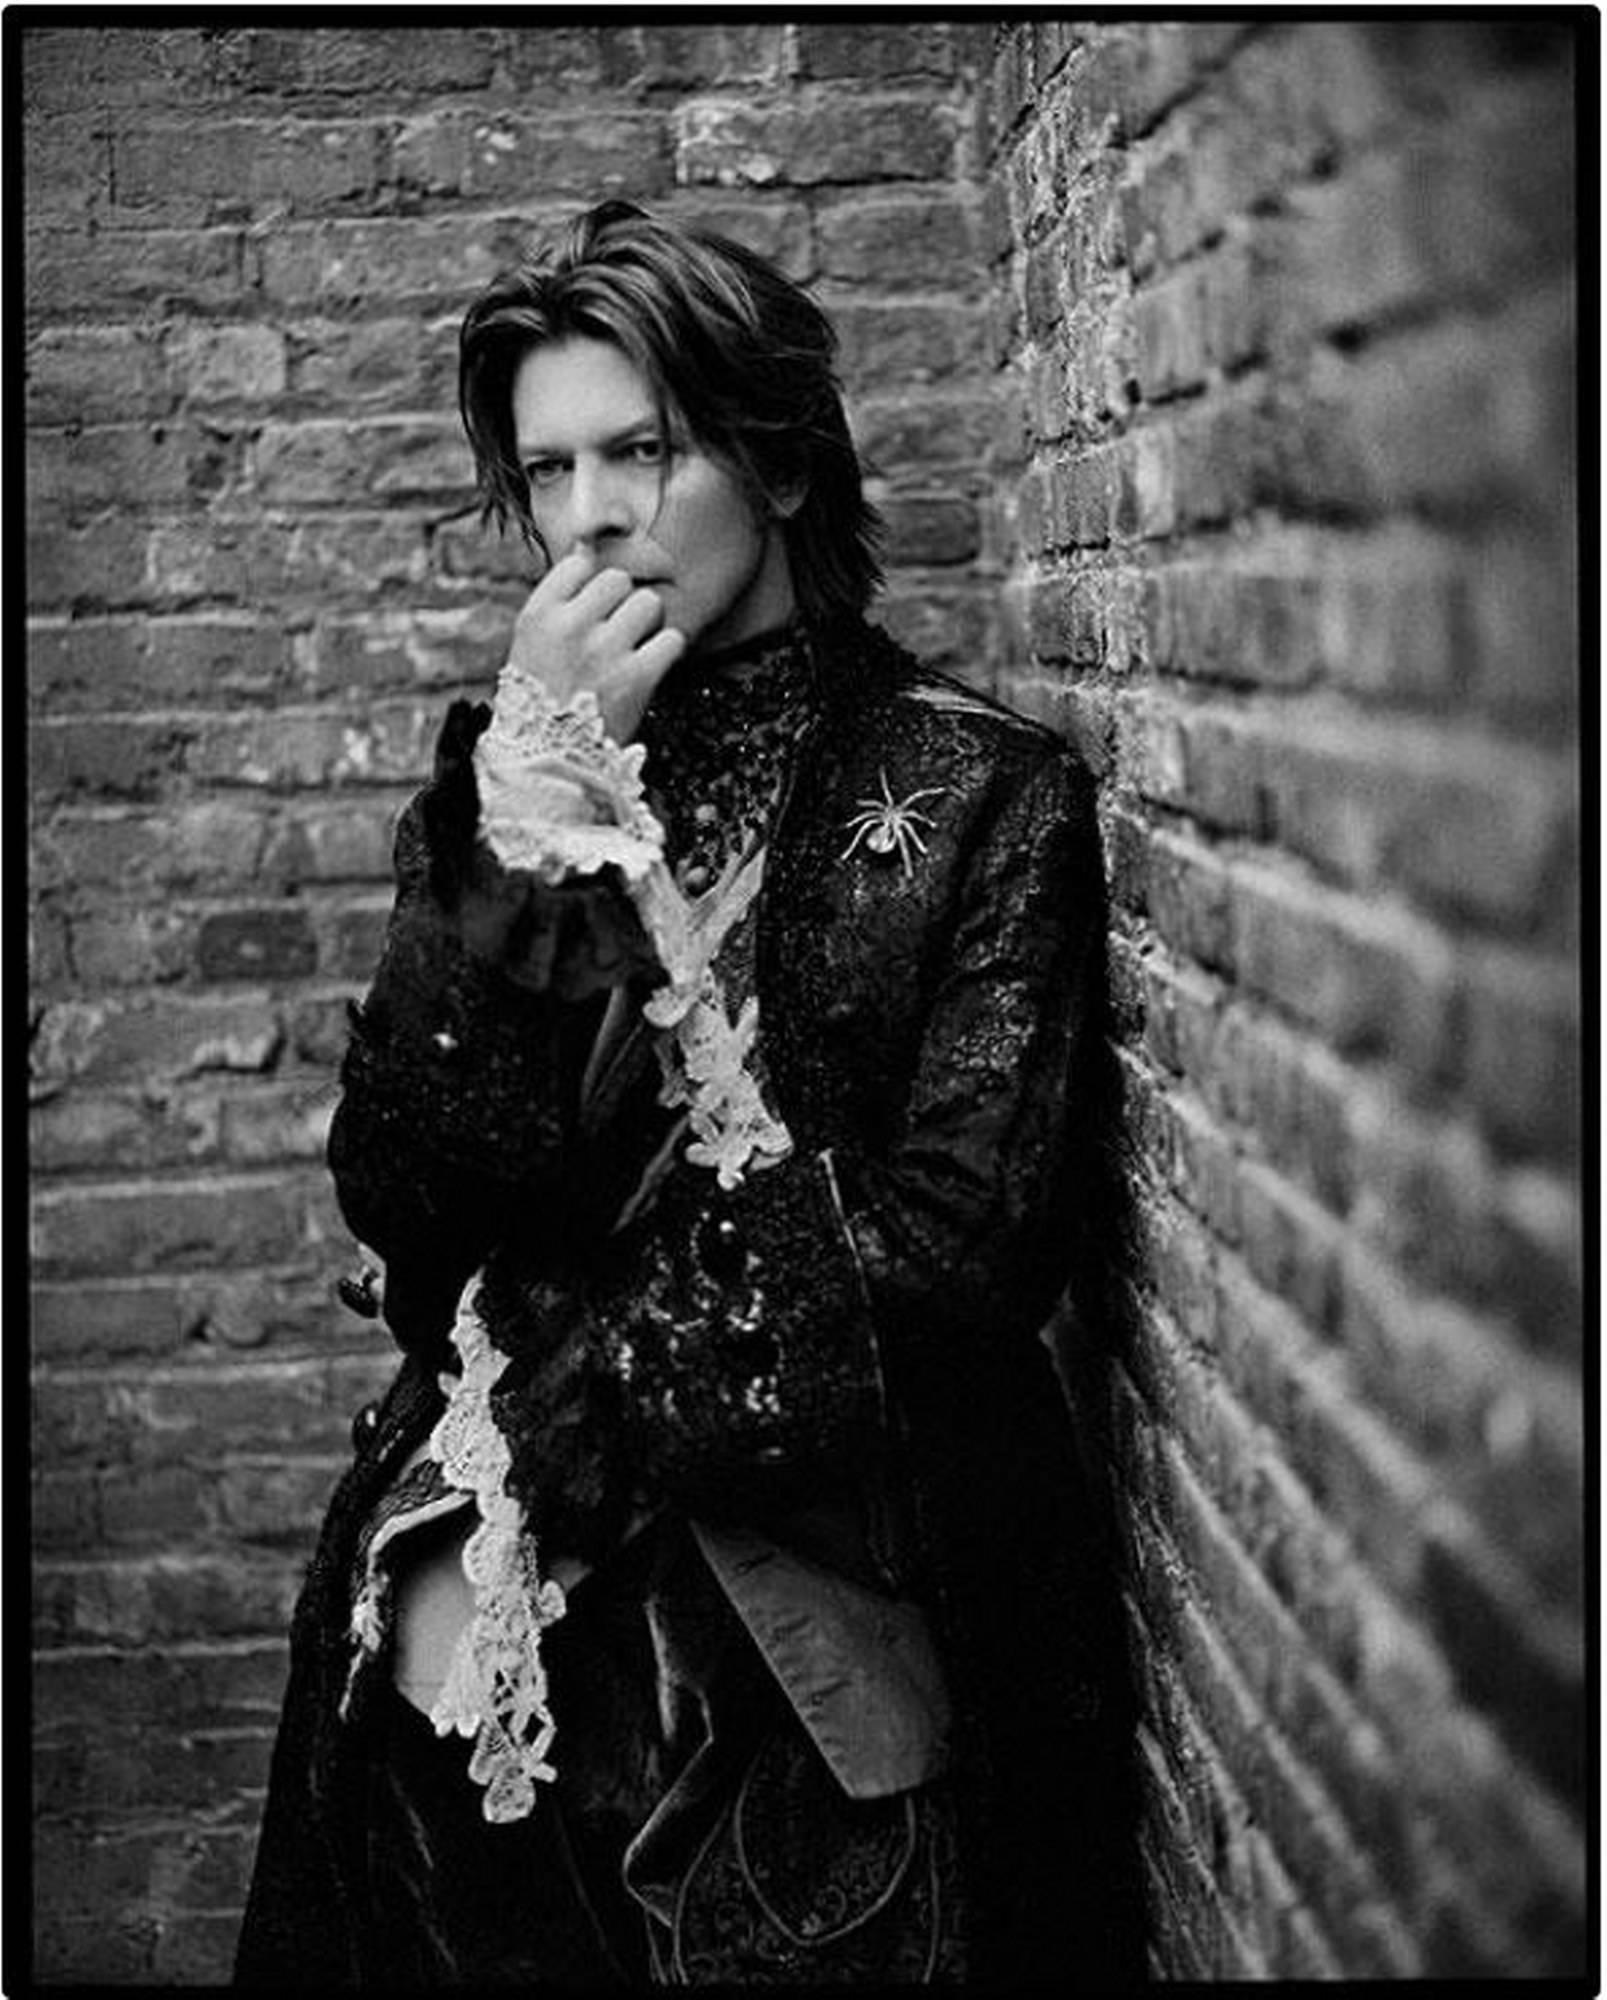 Mark Seliger Black and White Photograph - David Bowie, New York